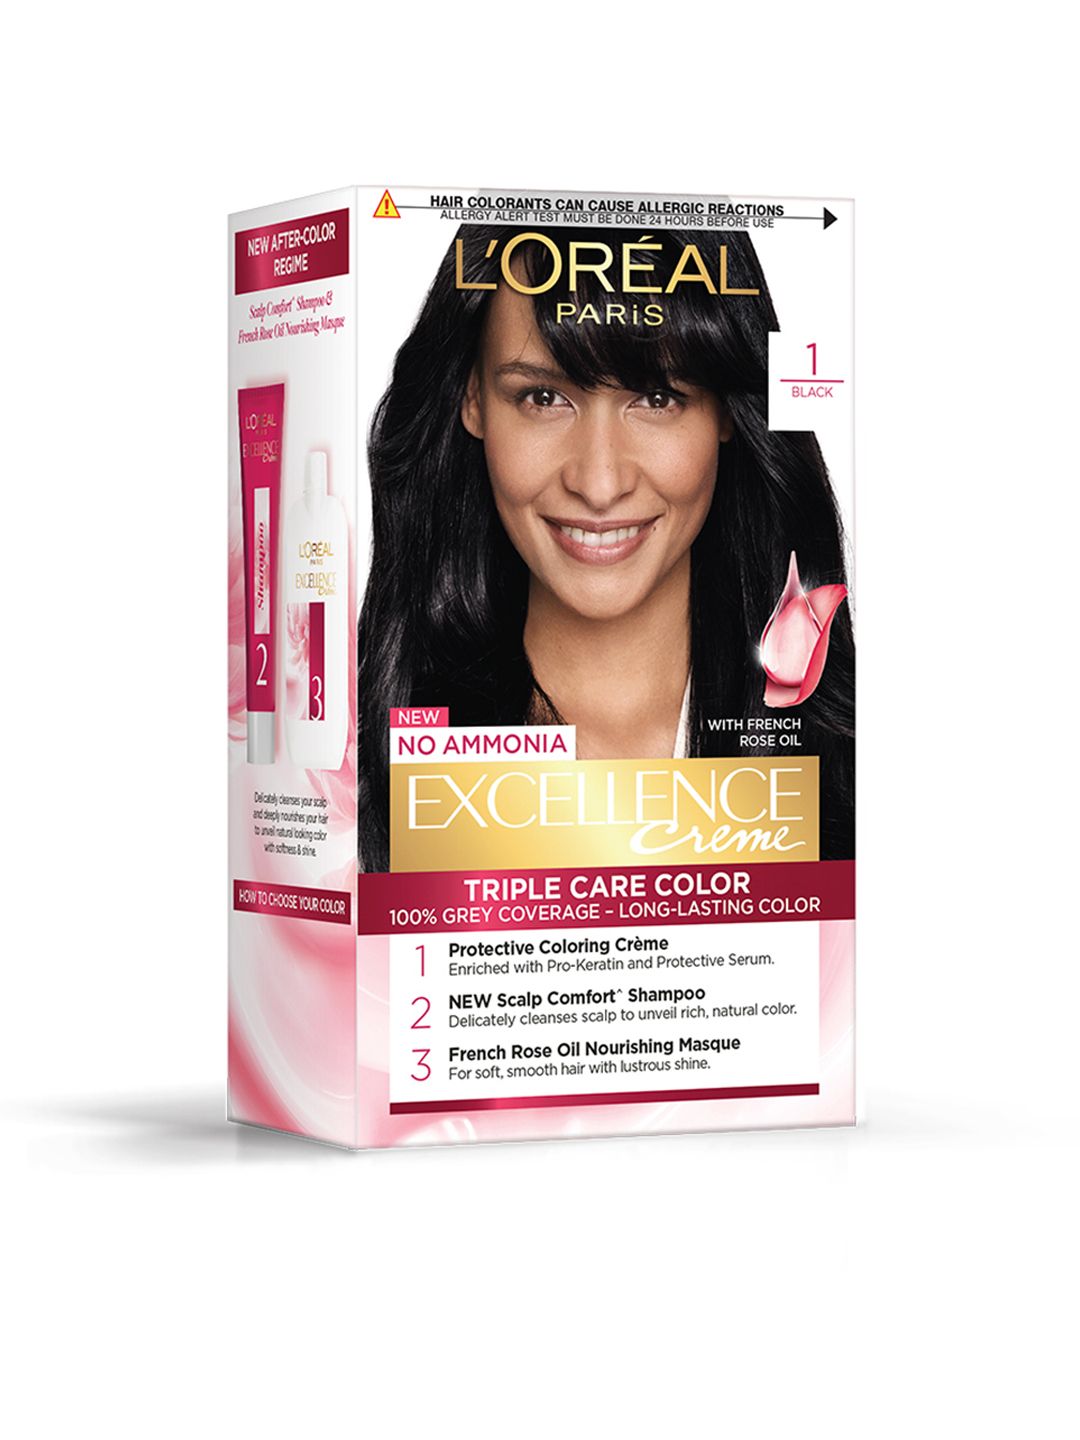 LOreal Paris Excellence Creme Triple Care Hair Color 72 ml+100g - Black 1 Price in India